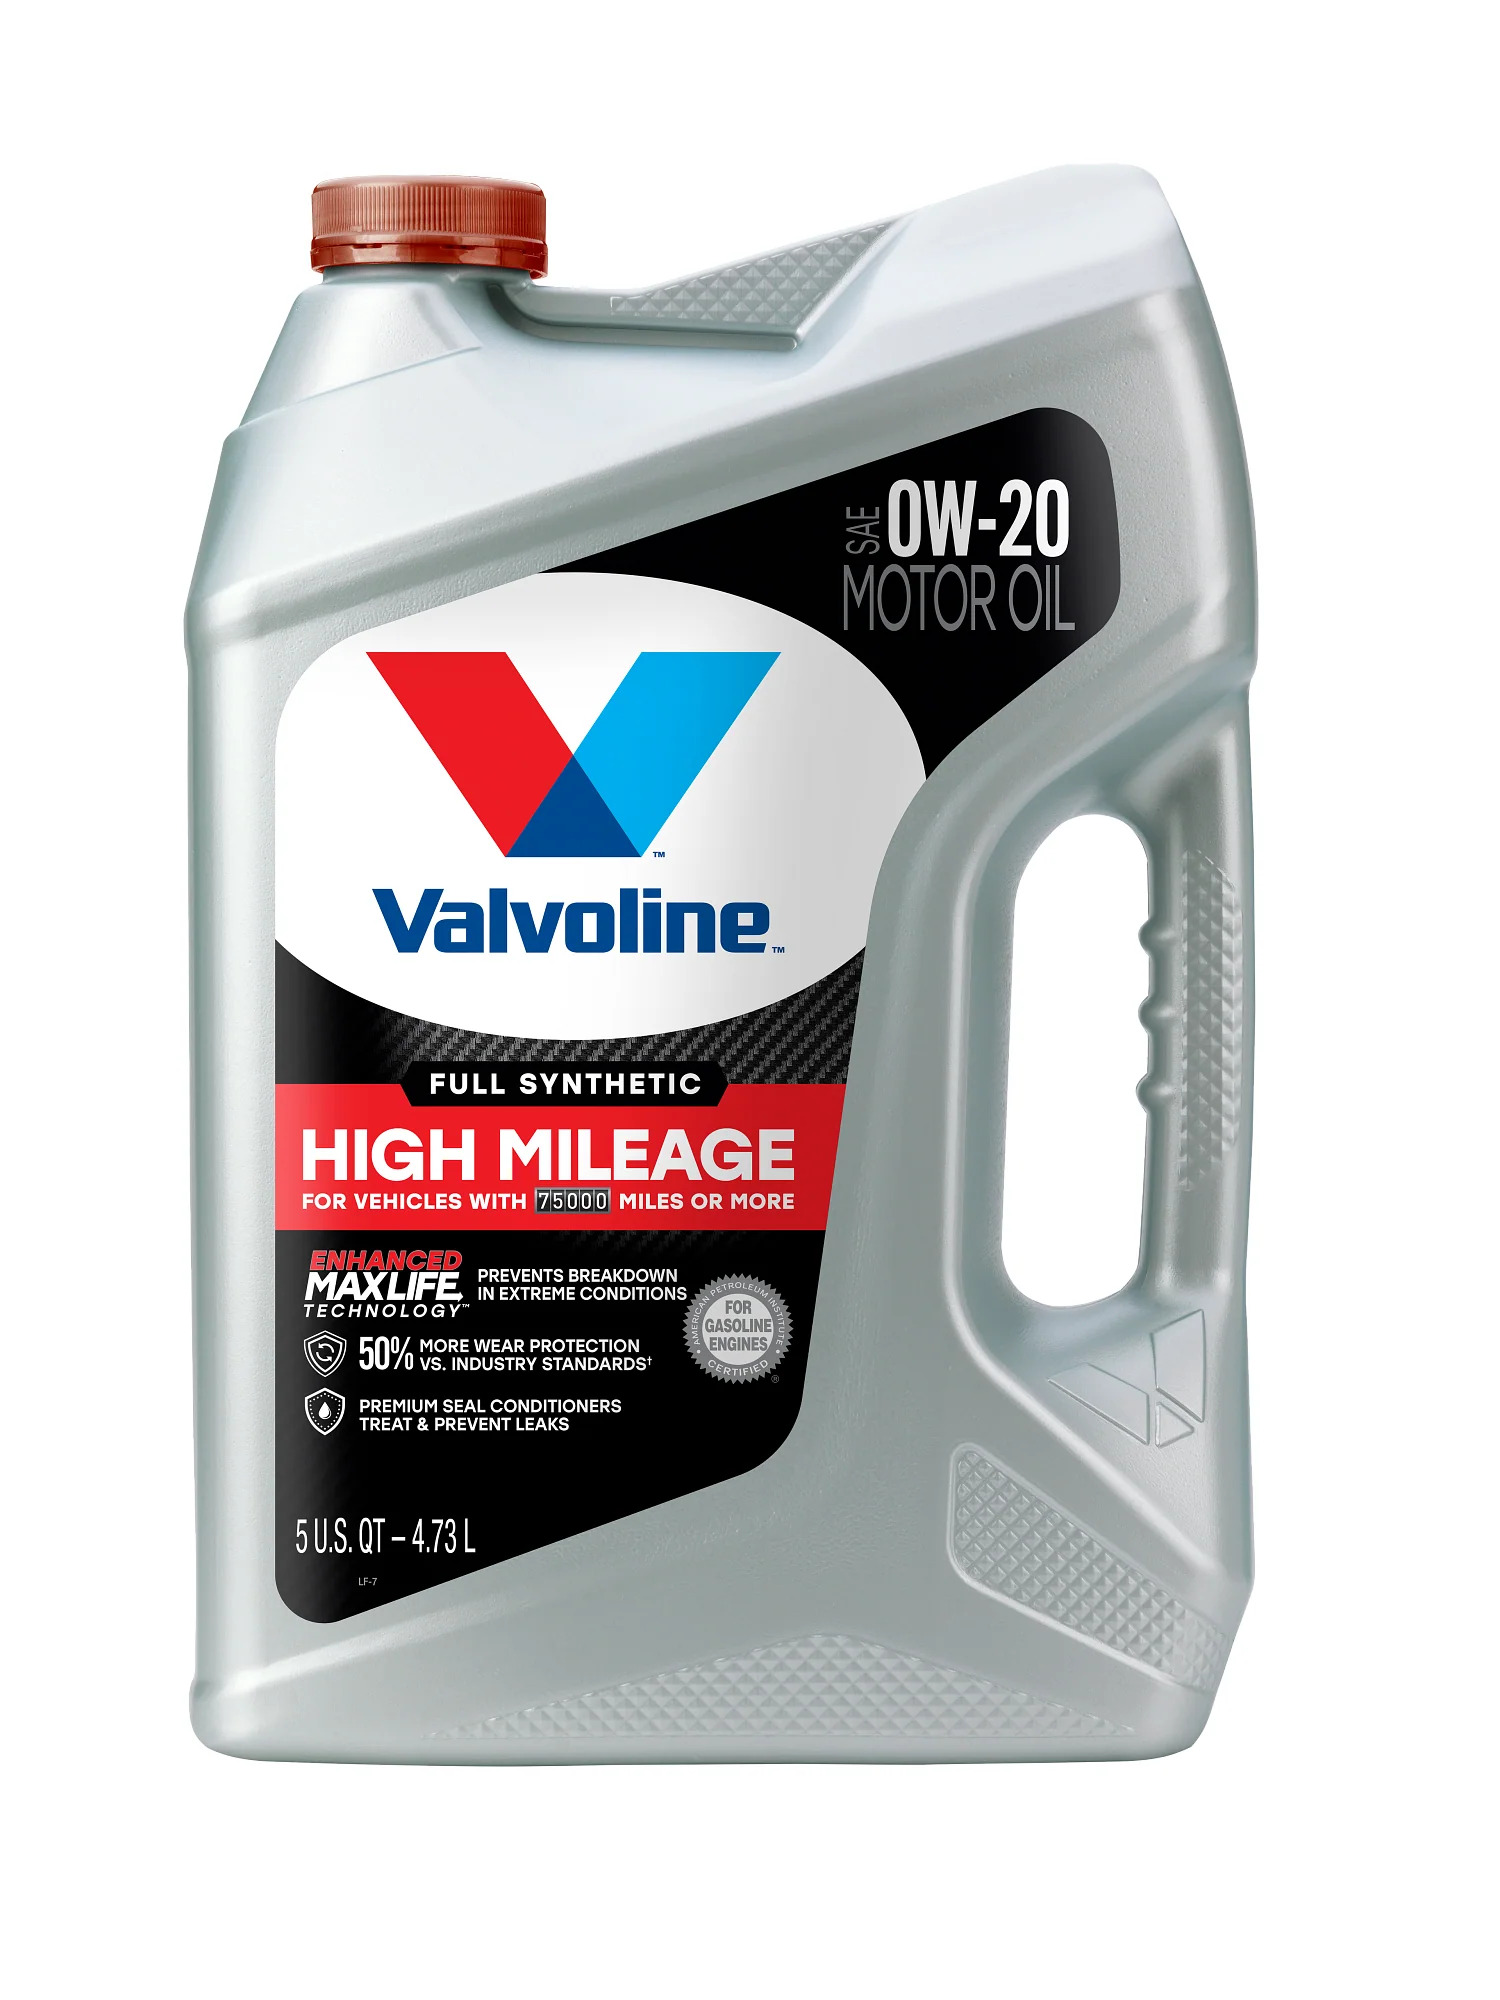 Valvoline Full Synthetic High Mileage with MaxLife Technology Motor Oil SAE 0W-20 - image 1 of 11